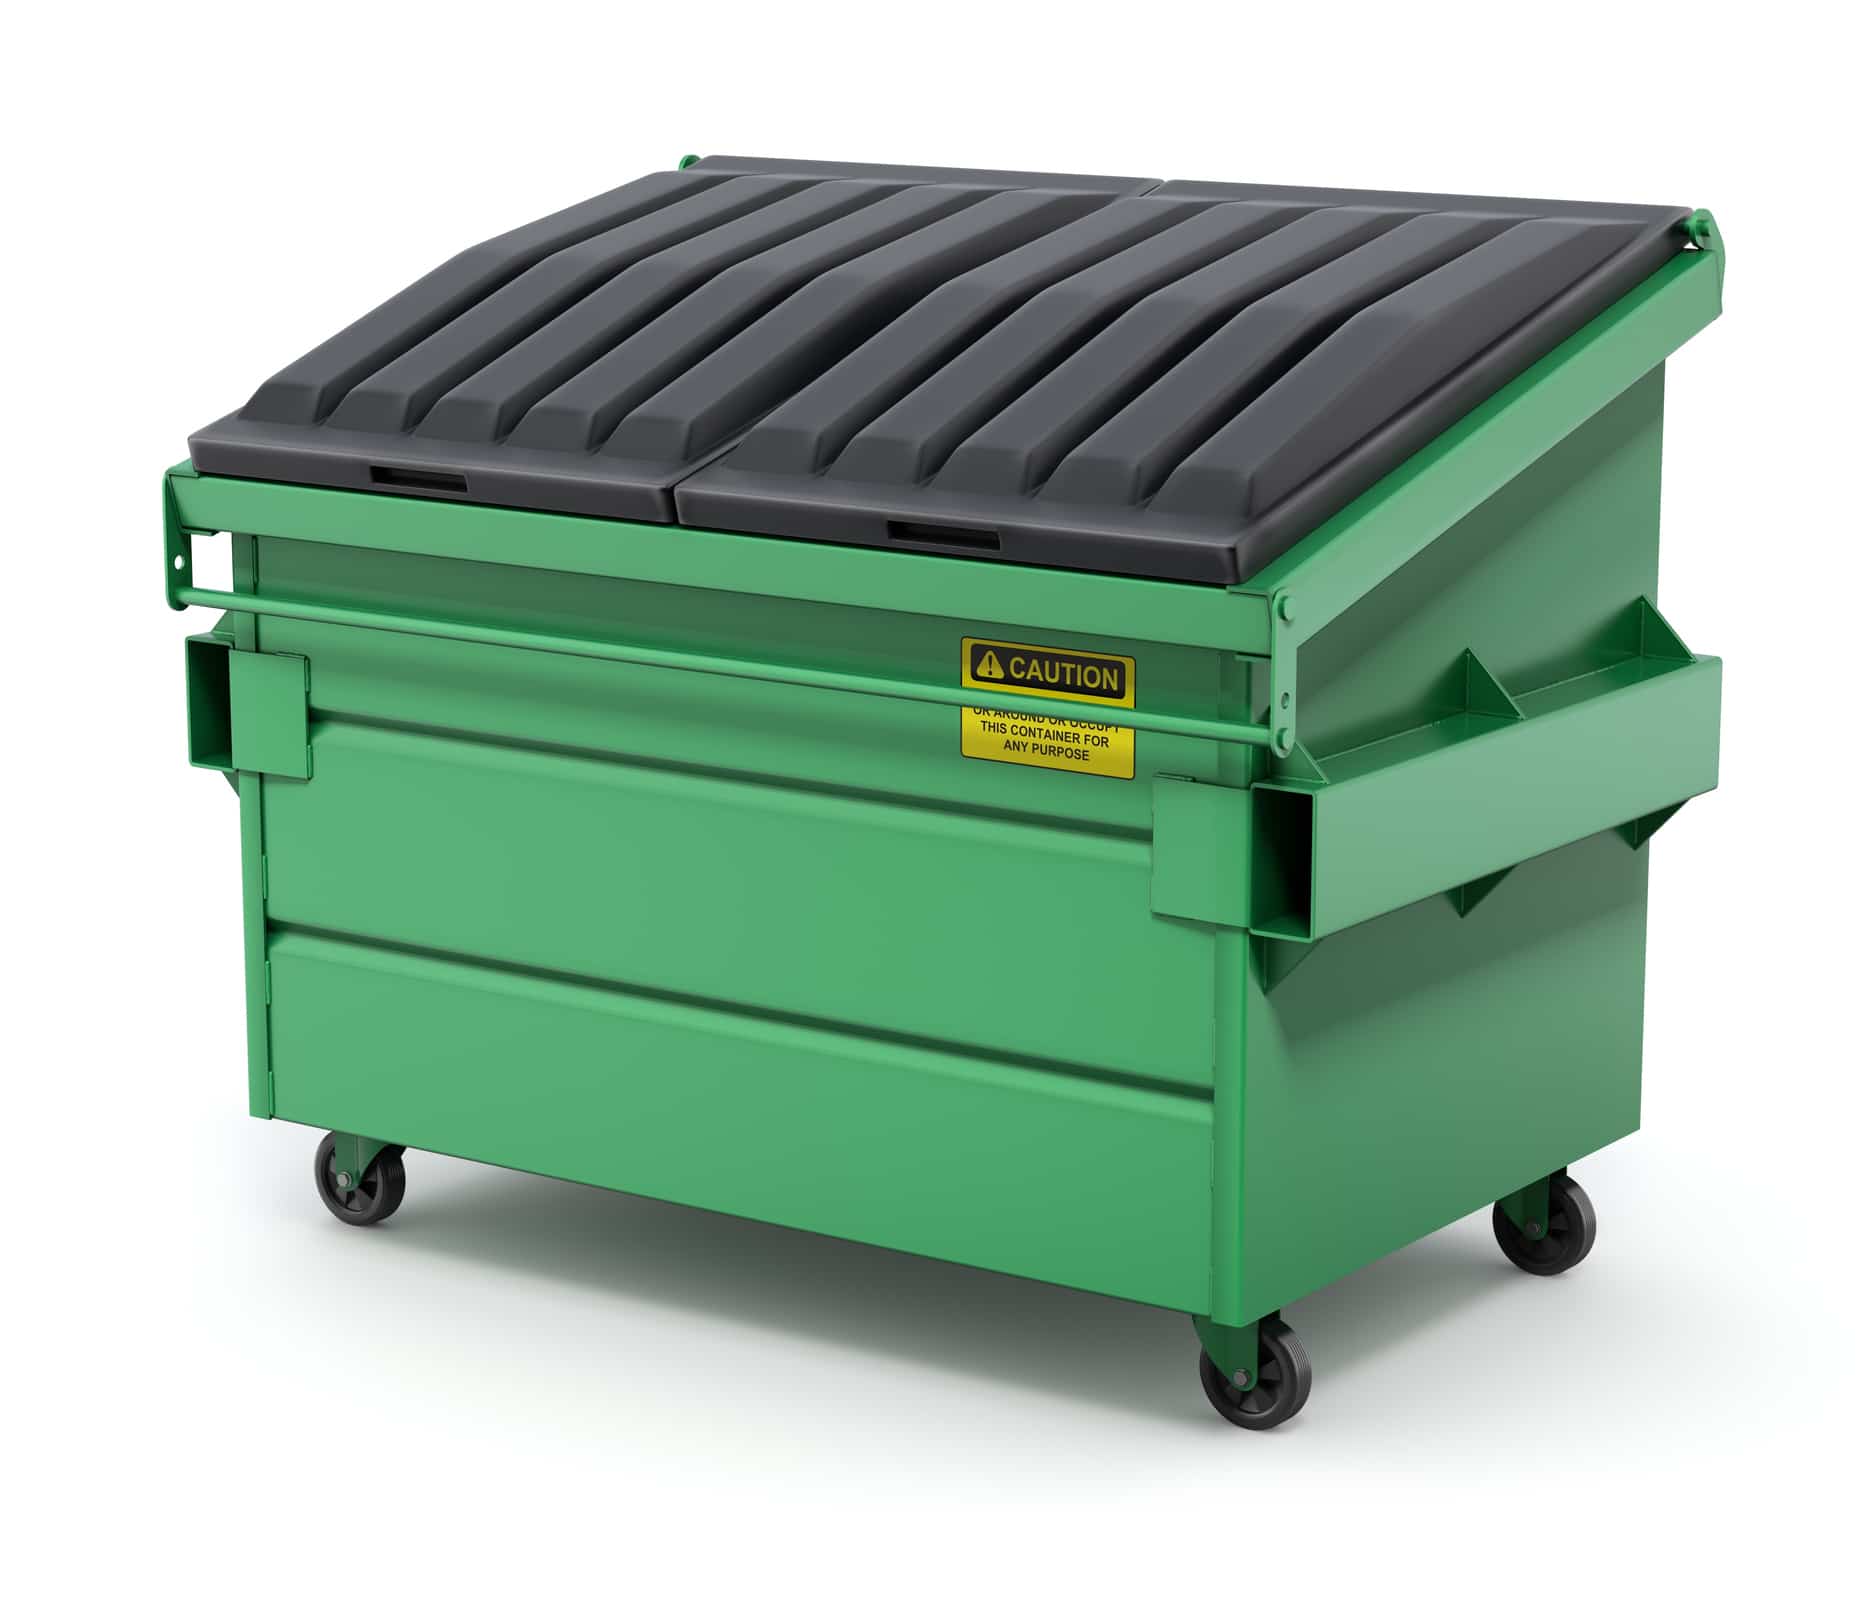 What Factors Affect the Price of Dumpster Rentals?